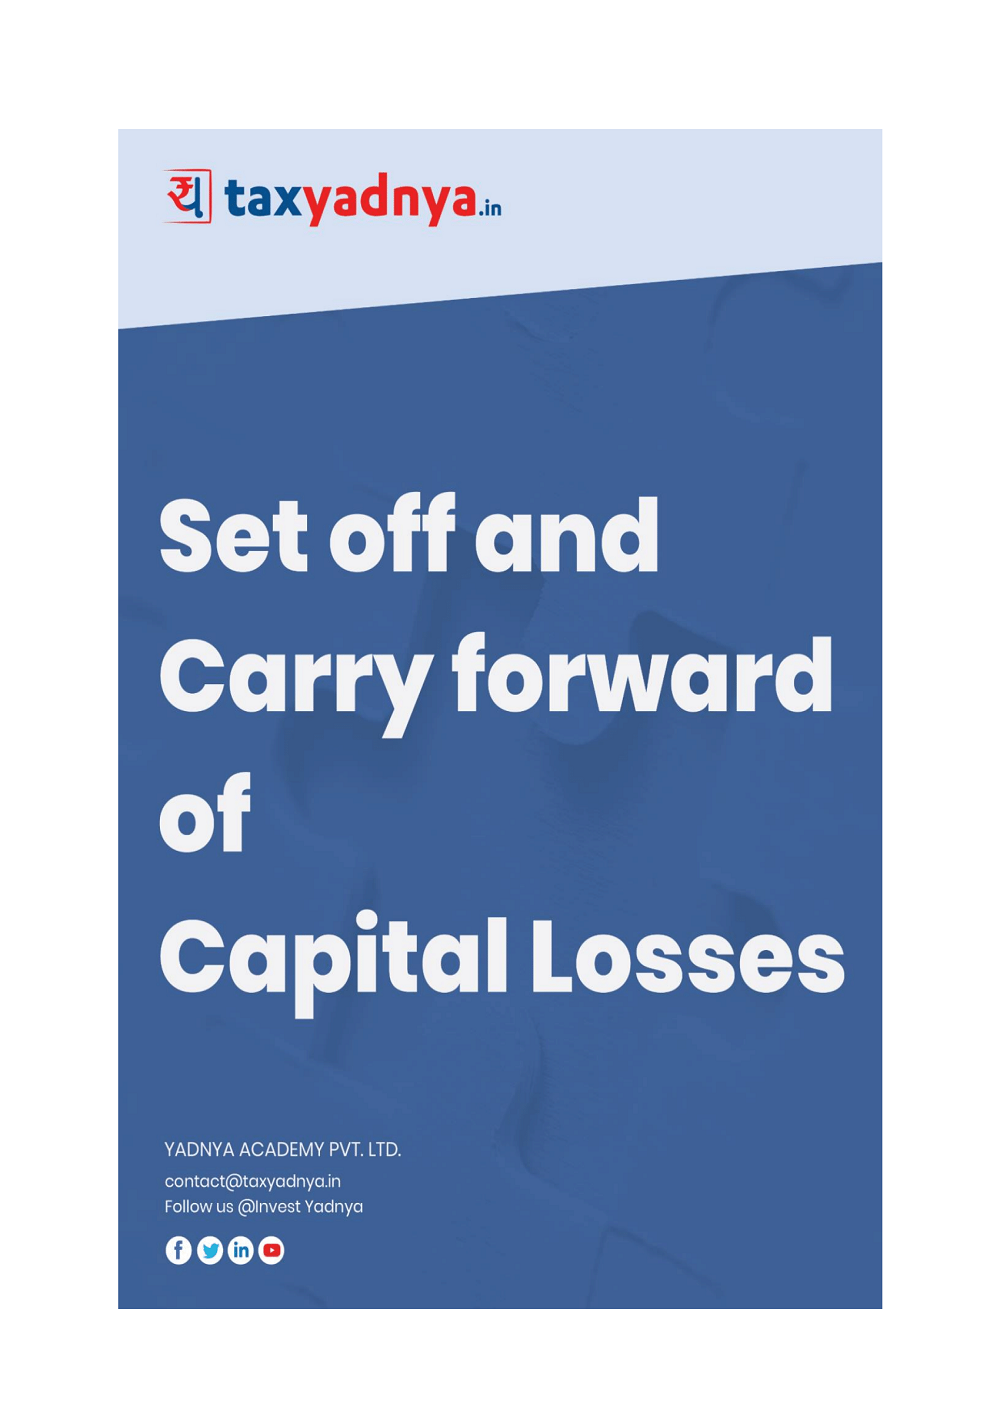 This e-book offers information as to how set off & carry forward capital losses incurred during the year. It offers information on the concept of capital losses & its adjustments. ✔ Detailed Research ✔ Quality Reports